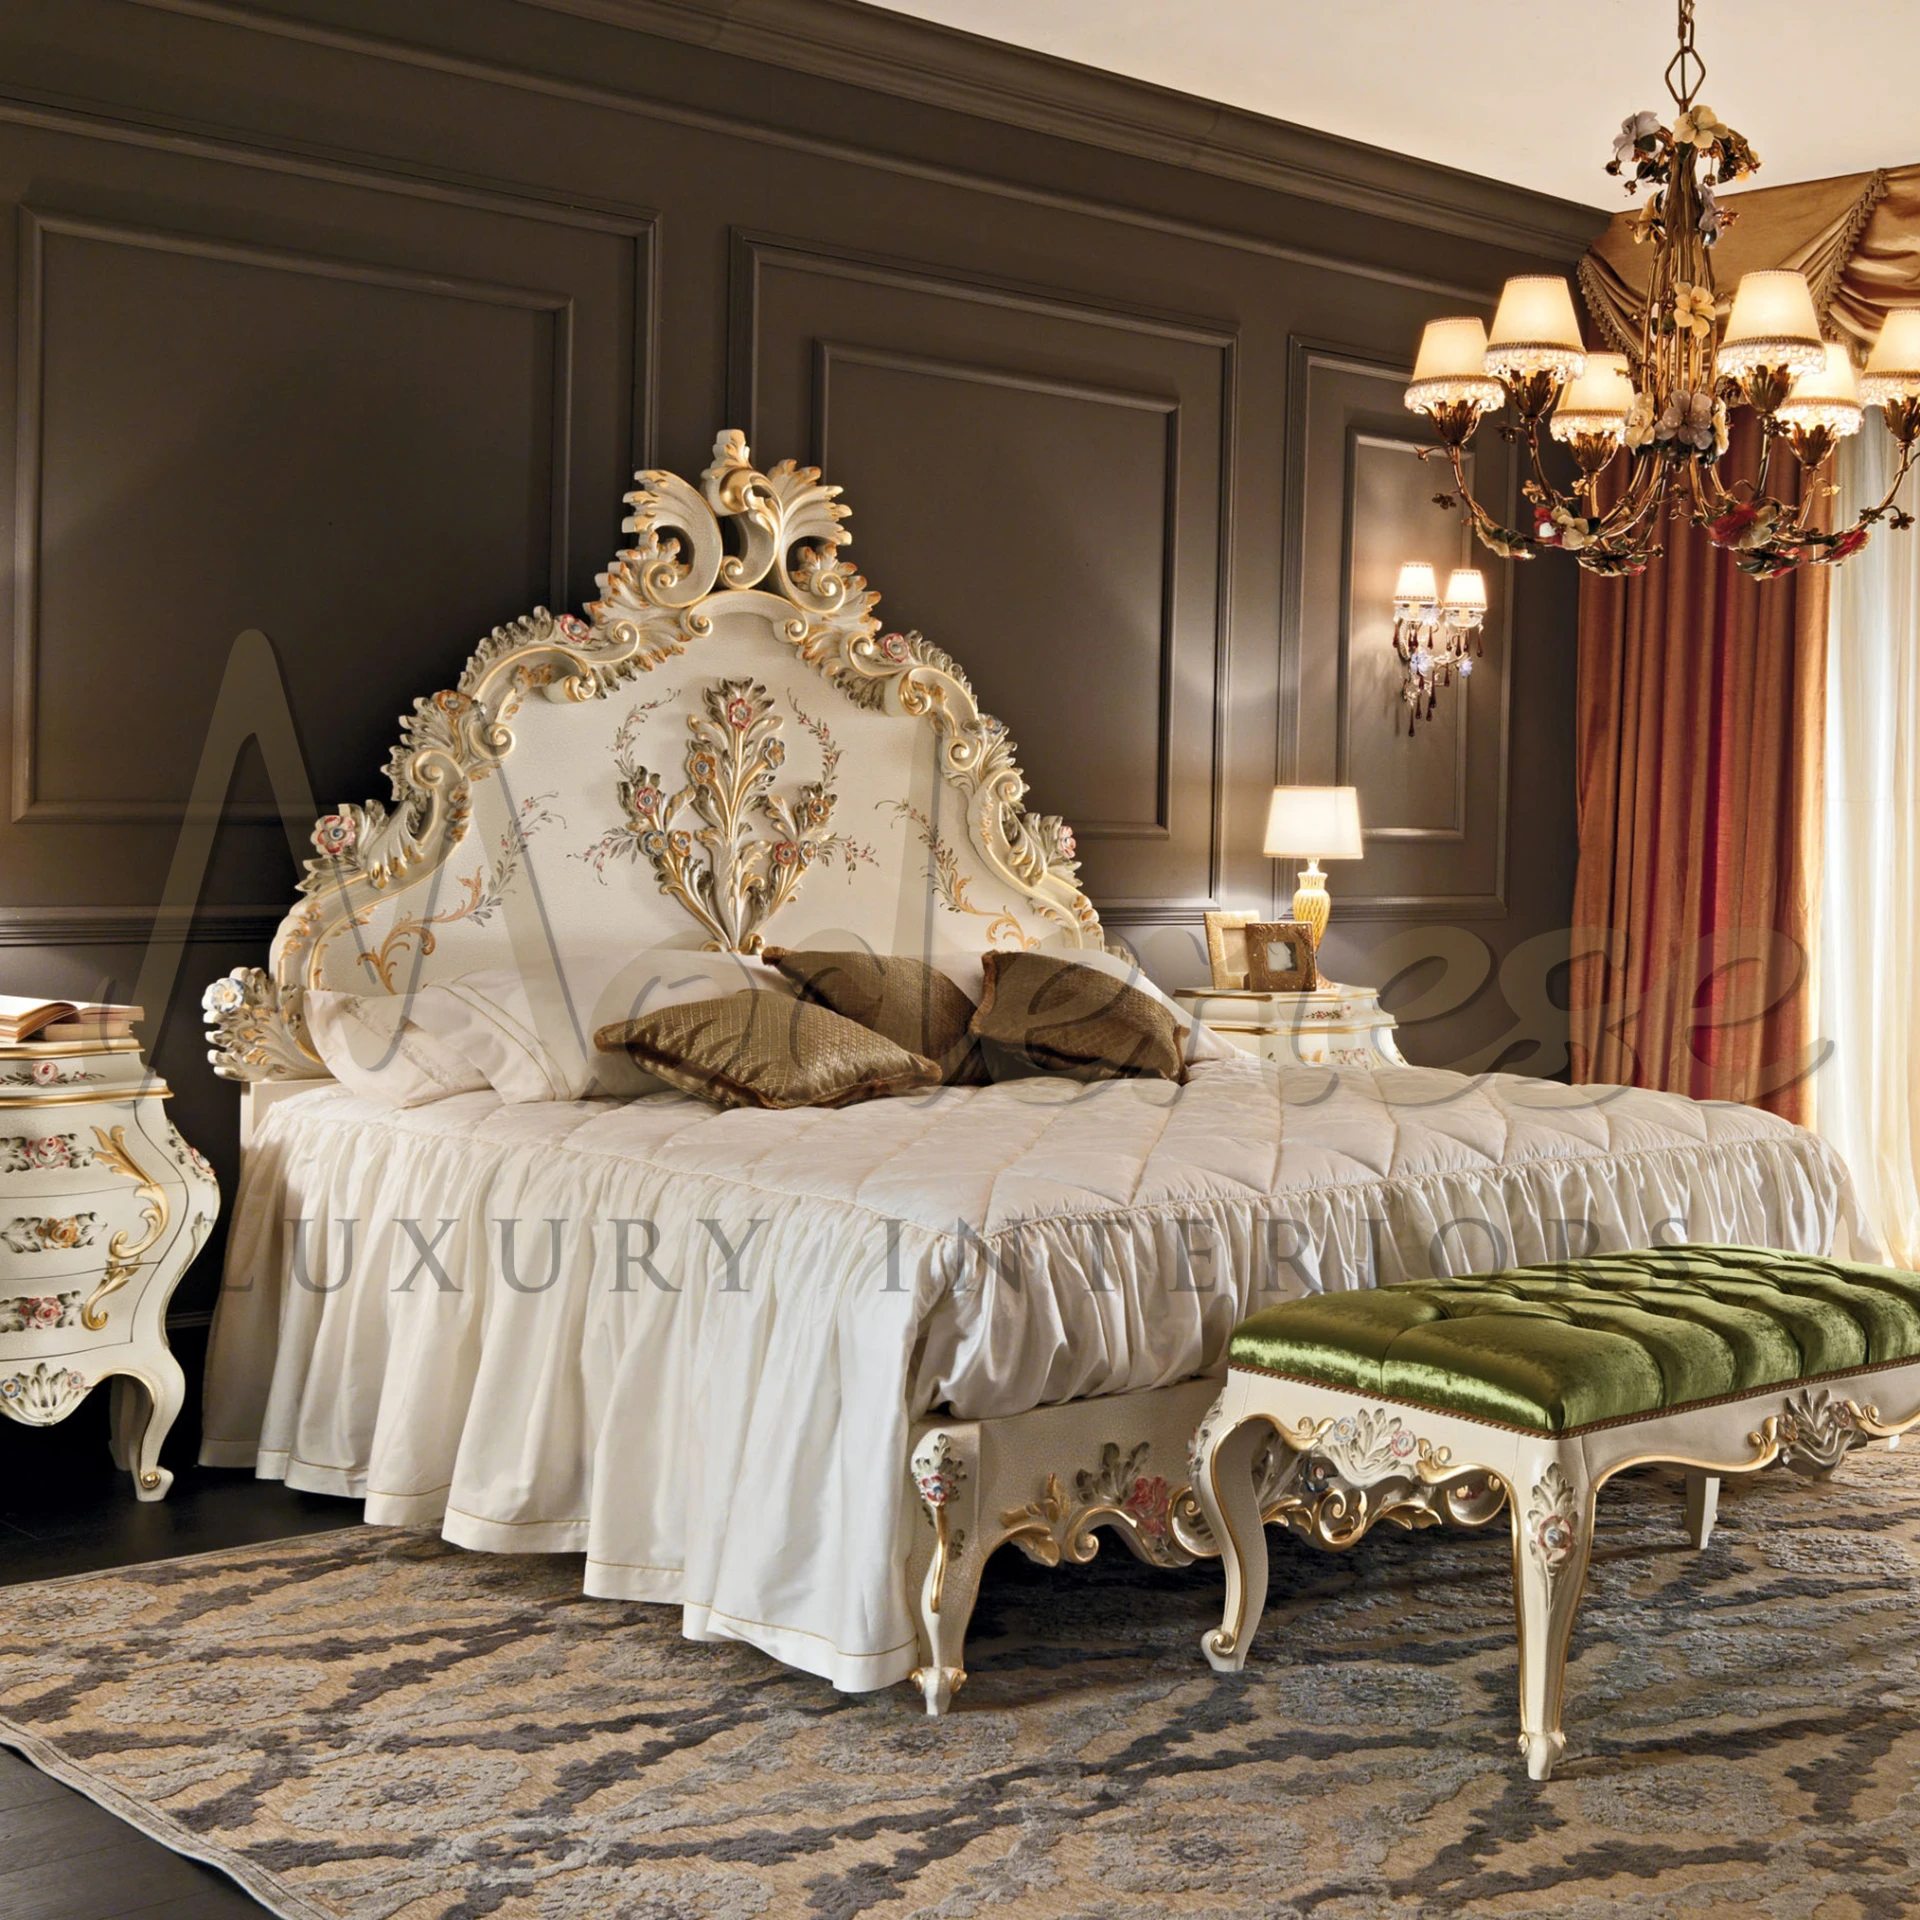 An elegant bedroom with a cream-colored, floral-carved headboard, a ruffled bedspread, a velvet bench, and a classical rug, exuding a warm, luxurious ambiance.